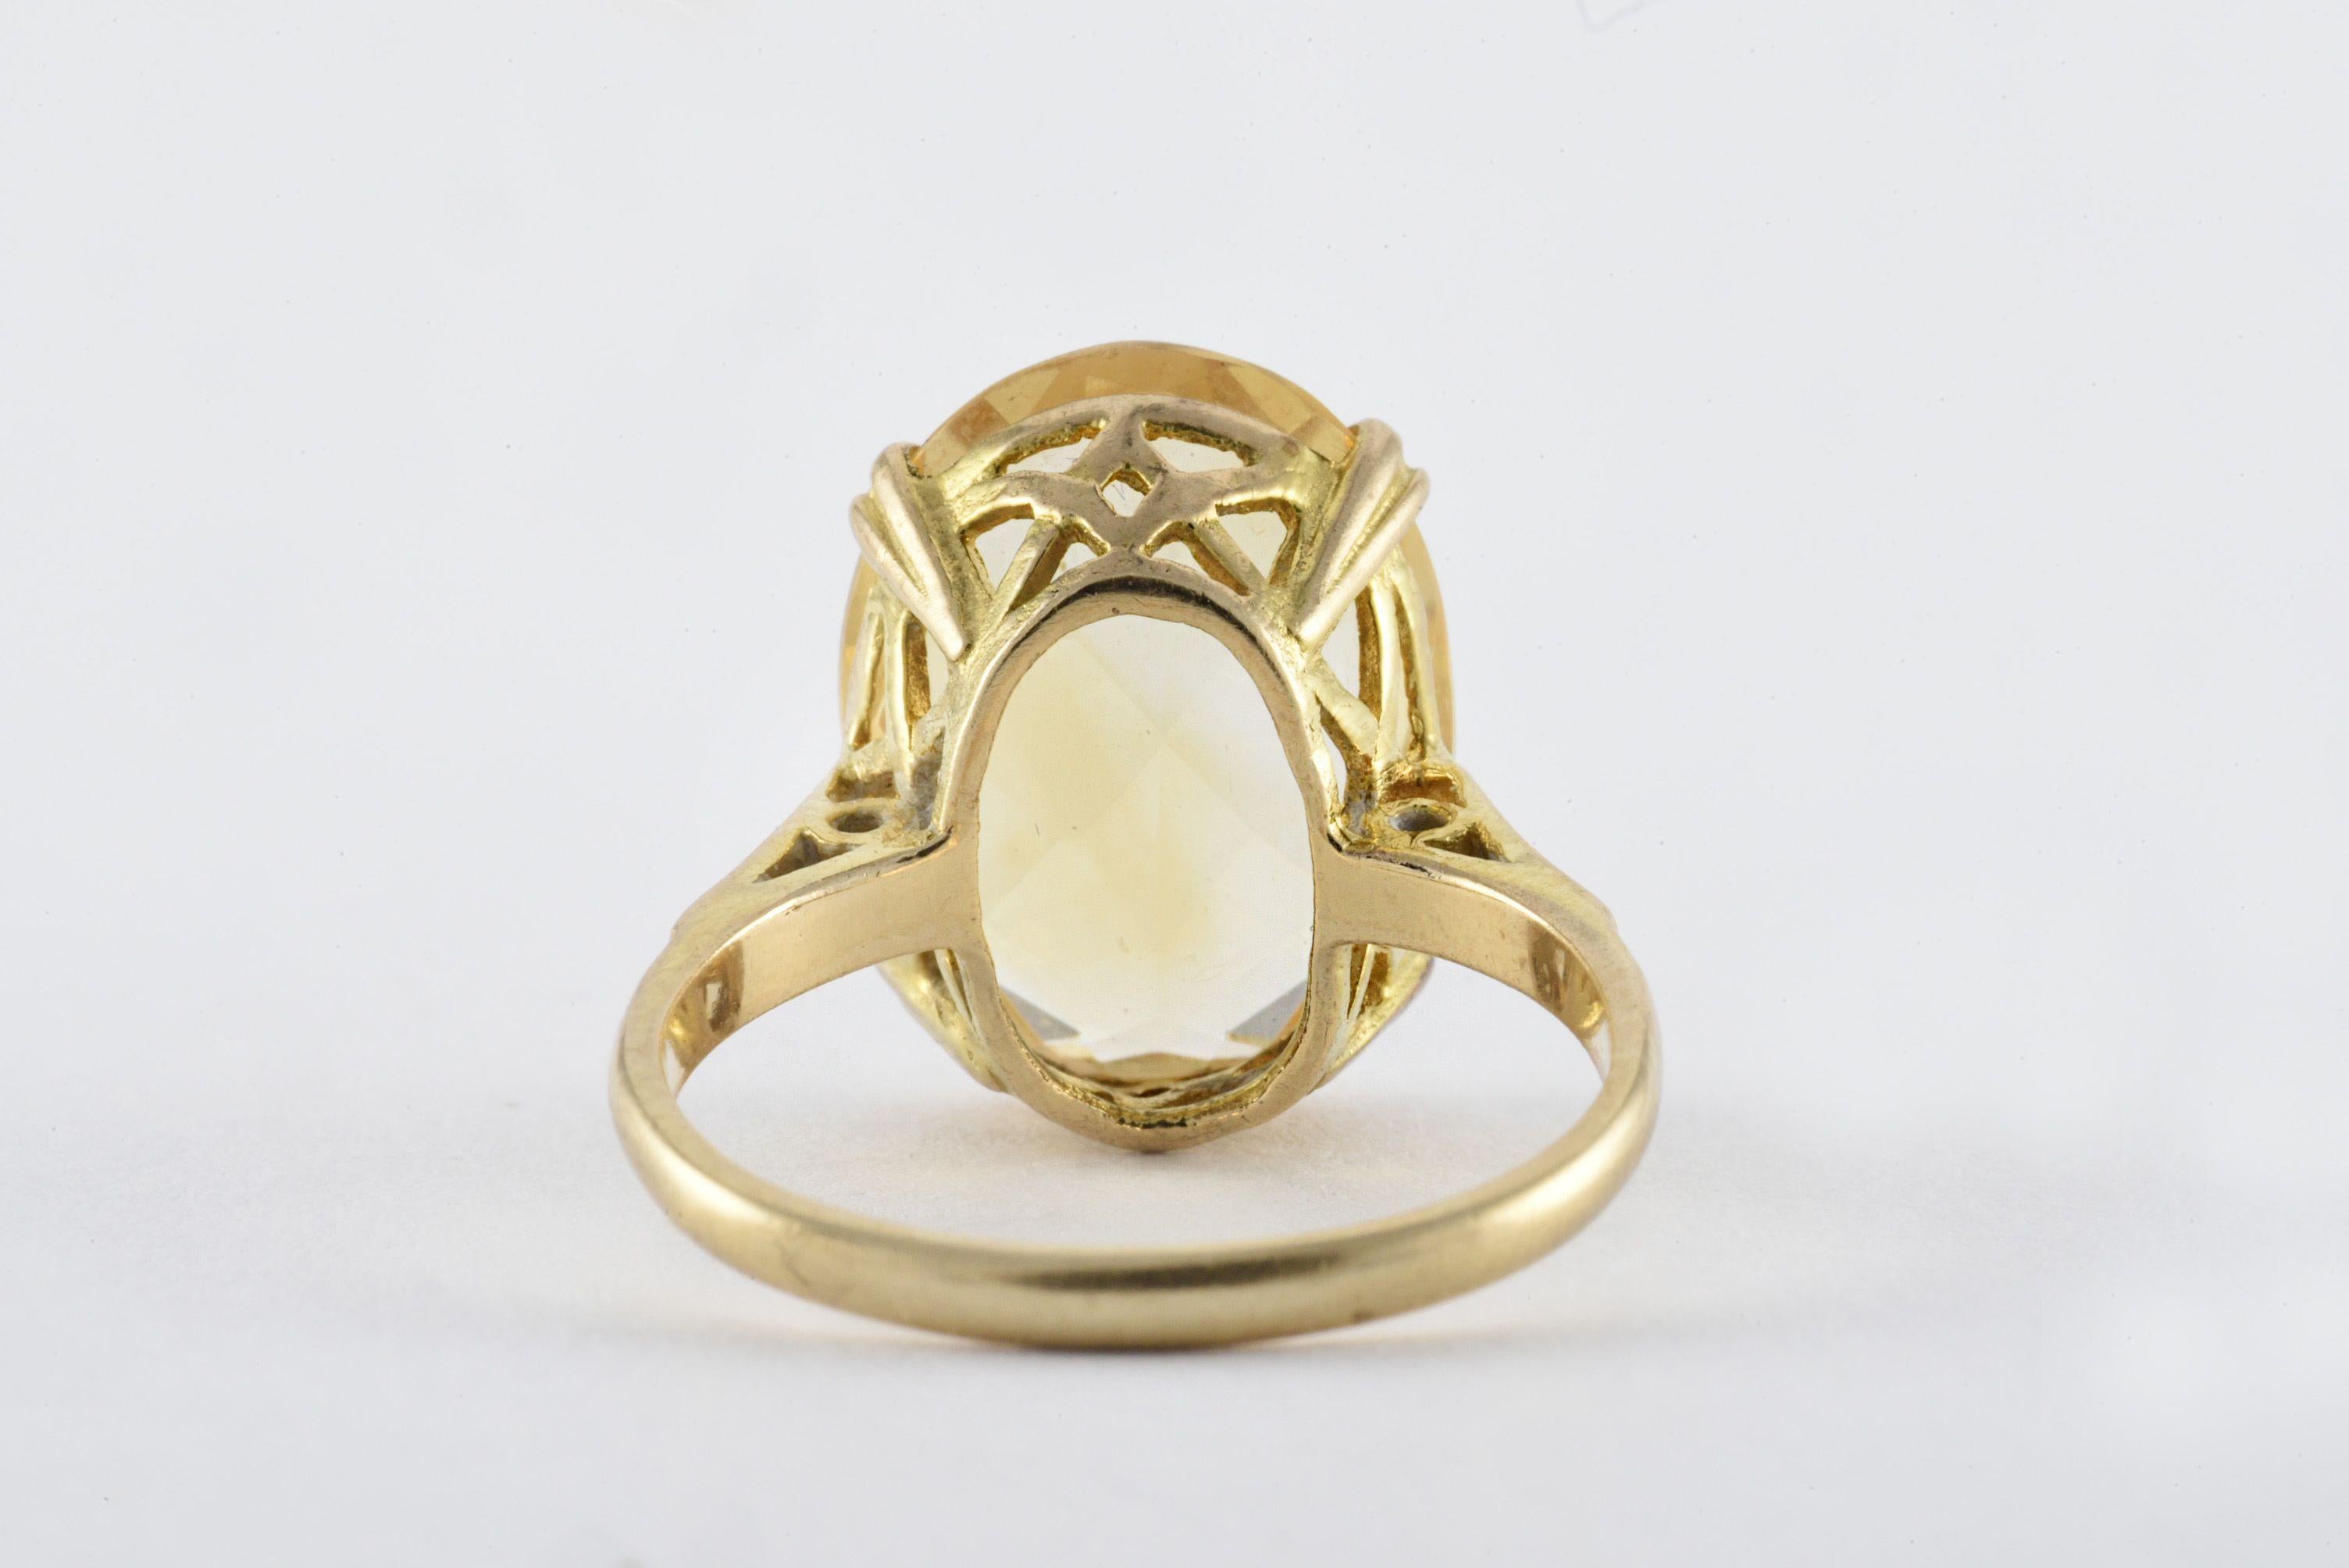 This bold cocktail ring features a large oval-shaped natural yellow citrine measuring 12 x 15 mm set in a 9kt yellow gold openwork gallery. The ring is stamped W&G, 9, 375, anchor, R, and R/ST. It appears the ring was manufactured by Wyatt & Gill,